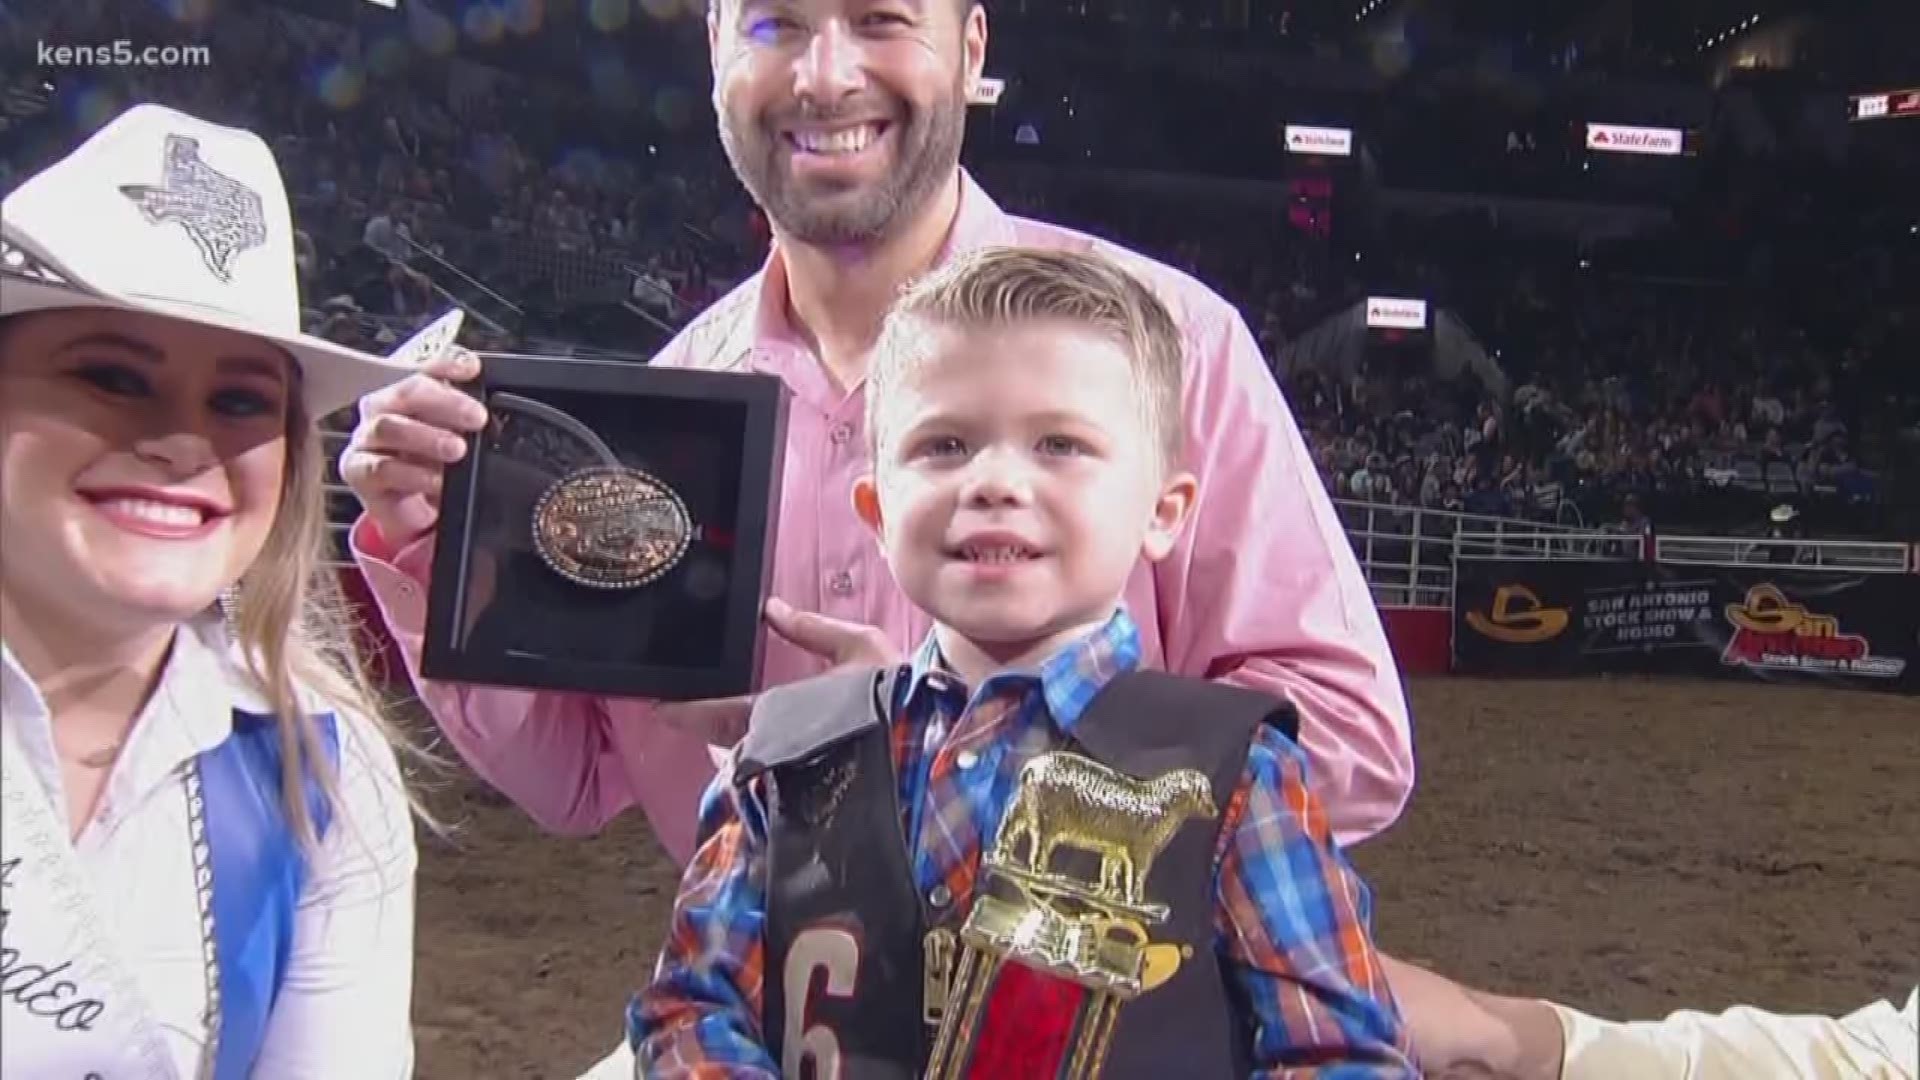 With a score of 92, 4-year-old Bo Wilder won Monday's Mutton Bustin' contest.